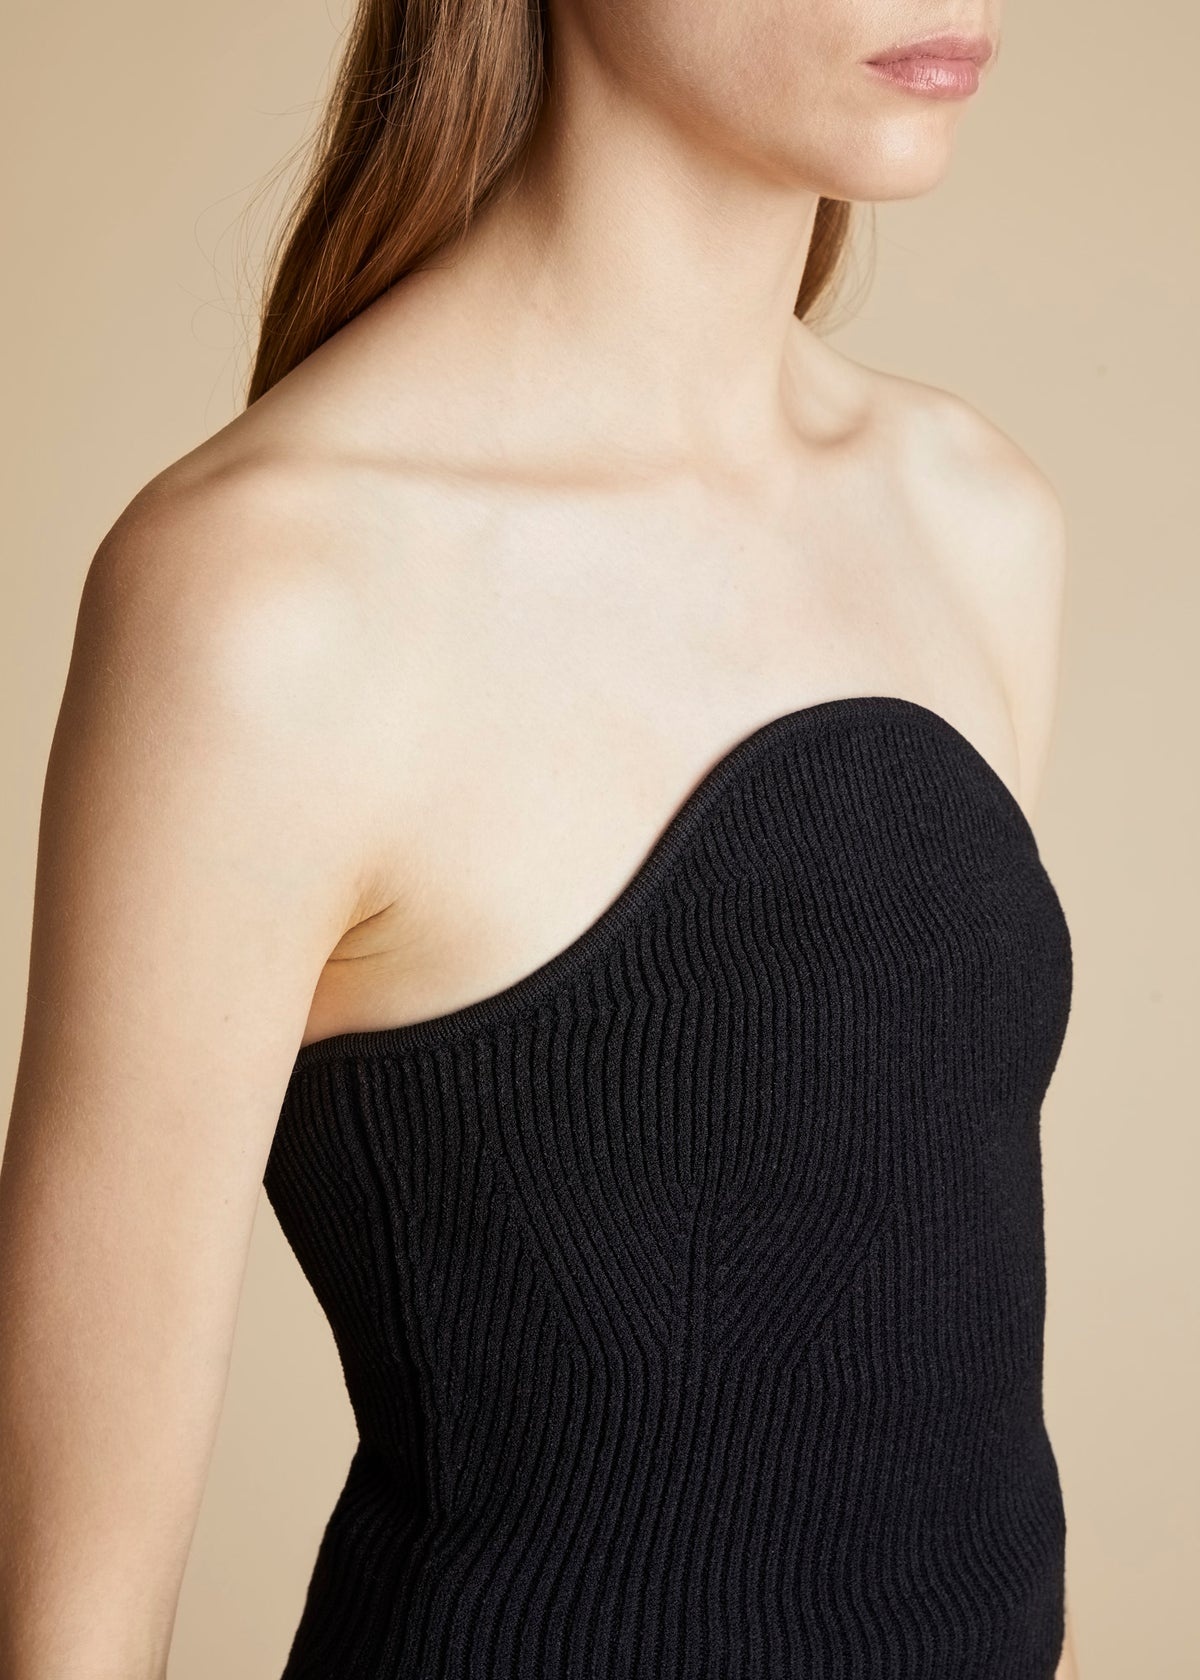 The Jericho Top in Black - 5